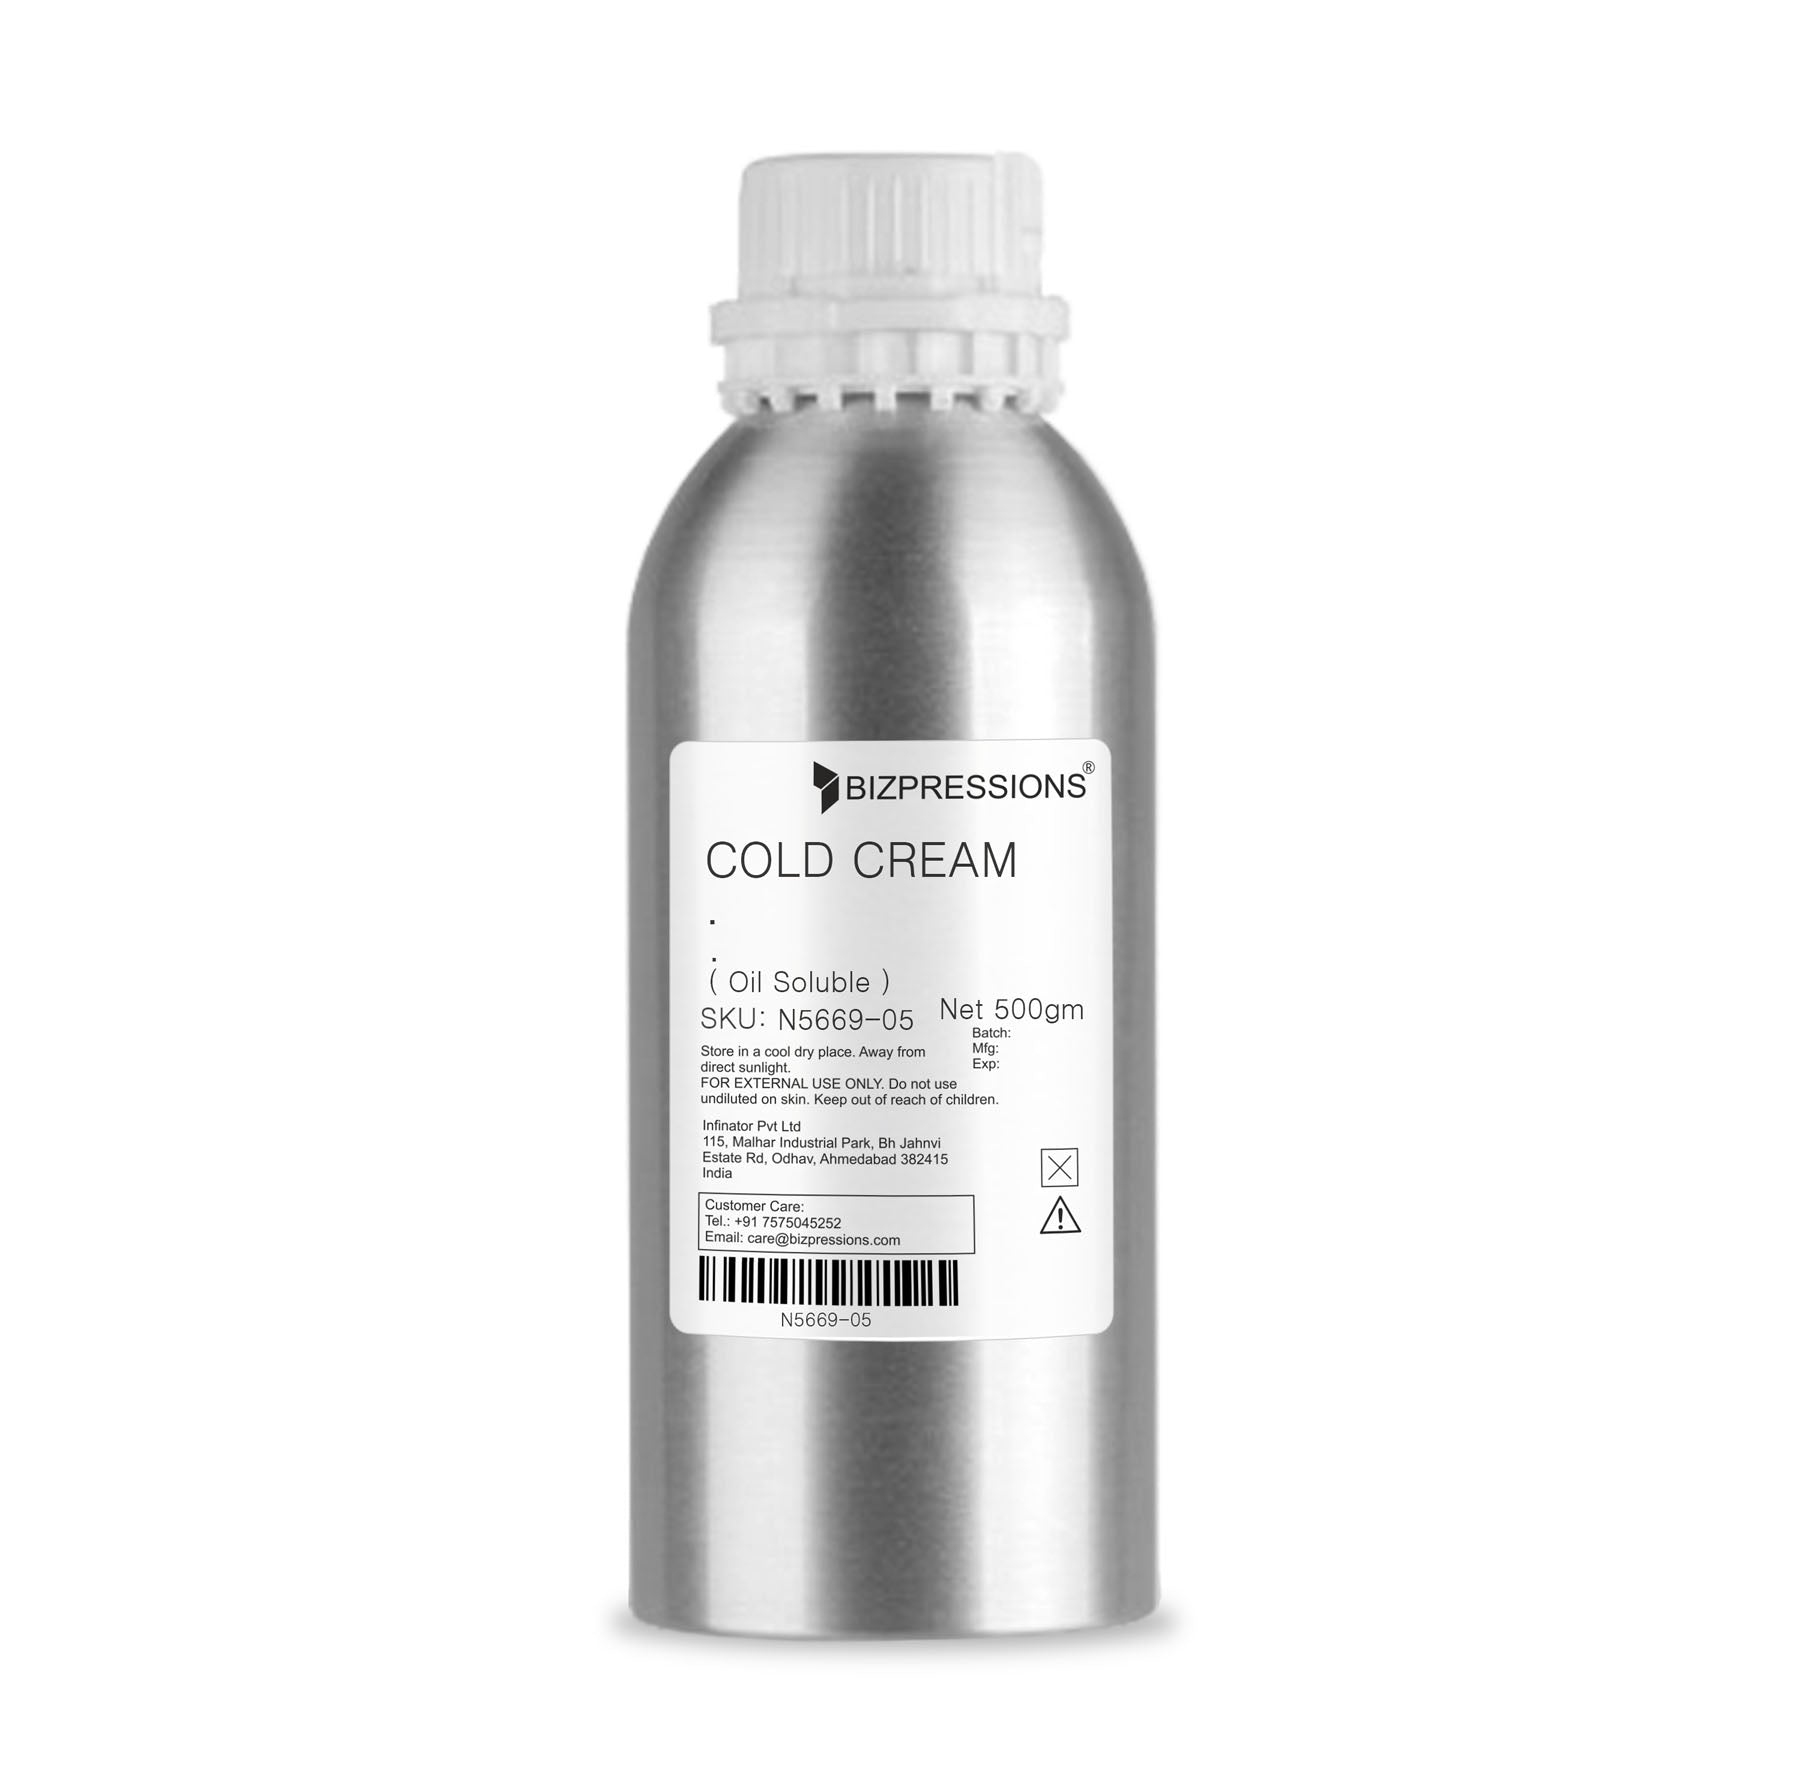 COLD CREAM - Fragrance ( Oil Soluble ) - 500 gm